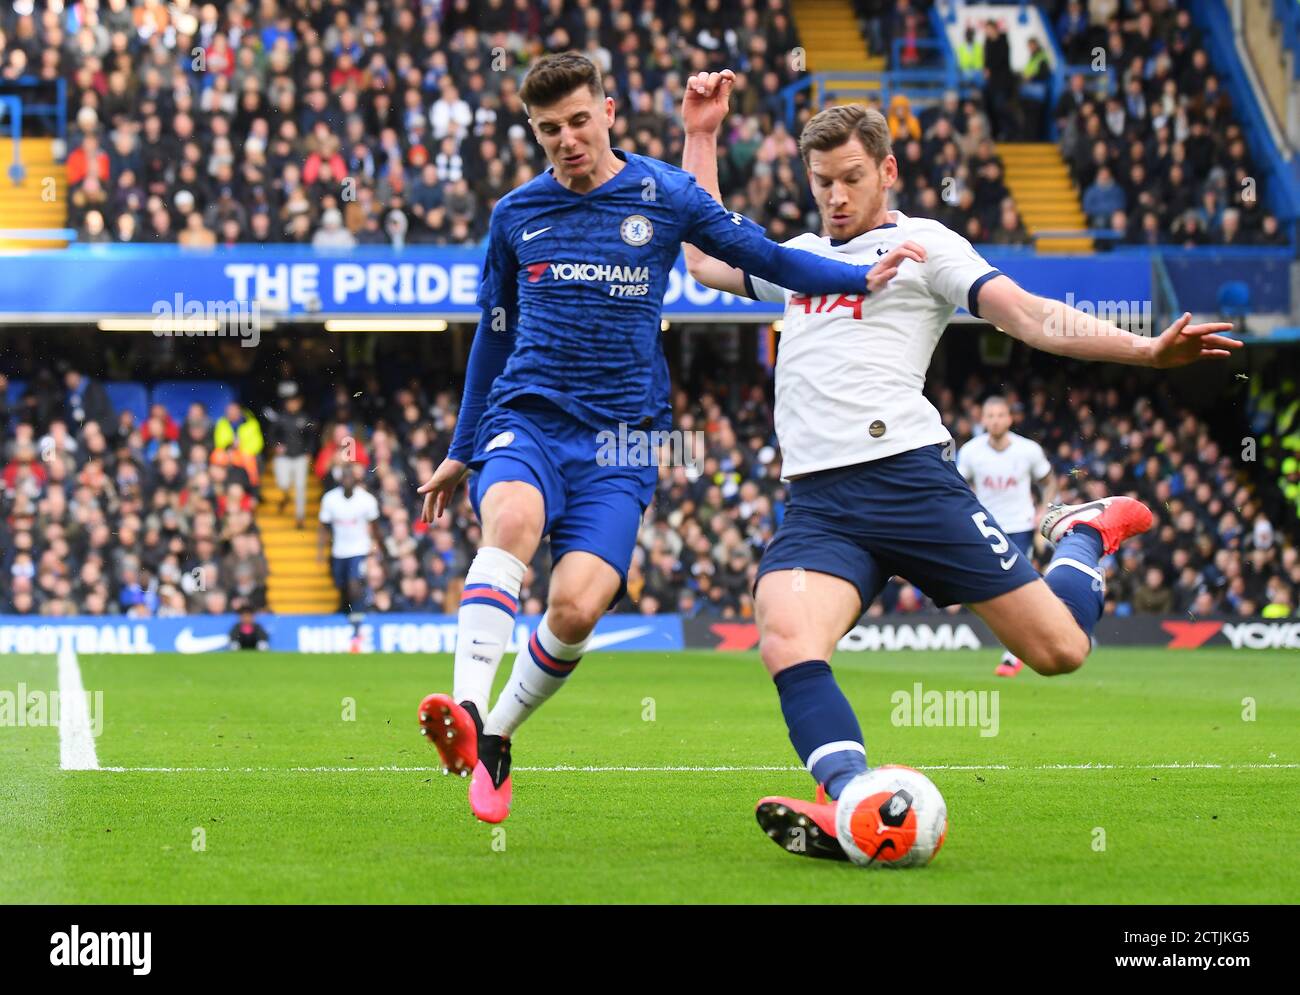 LONDON, ENGLAND - FEBRUARY 22, 2020: Mason Tony Mount of Chelsea and Jan Vertonghen of Tottenham pictured during the 2019/20 Premier League game between Chelsea FC and Tottenham Hotspur FC at Stamford Bridge. Stock Photo